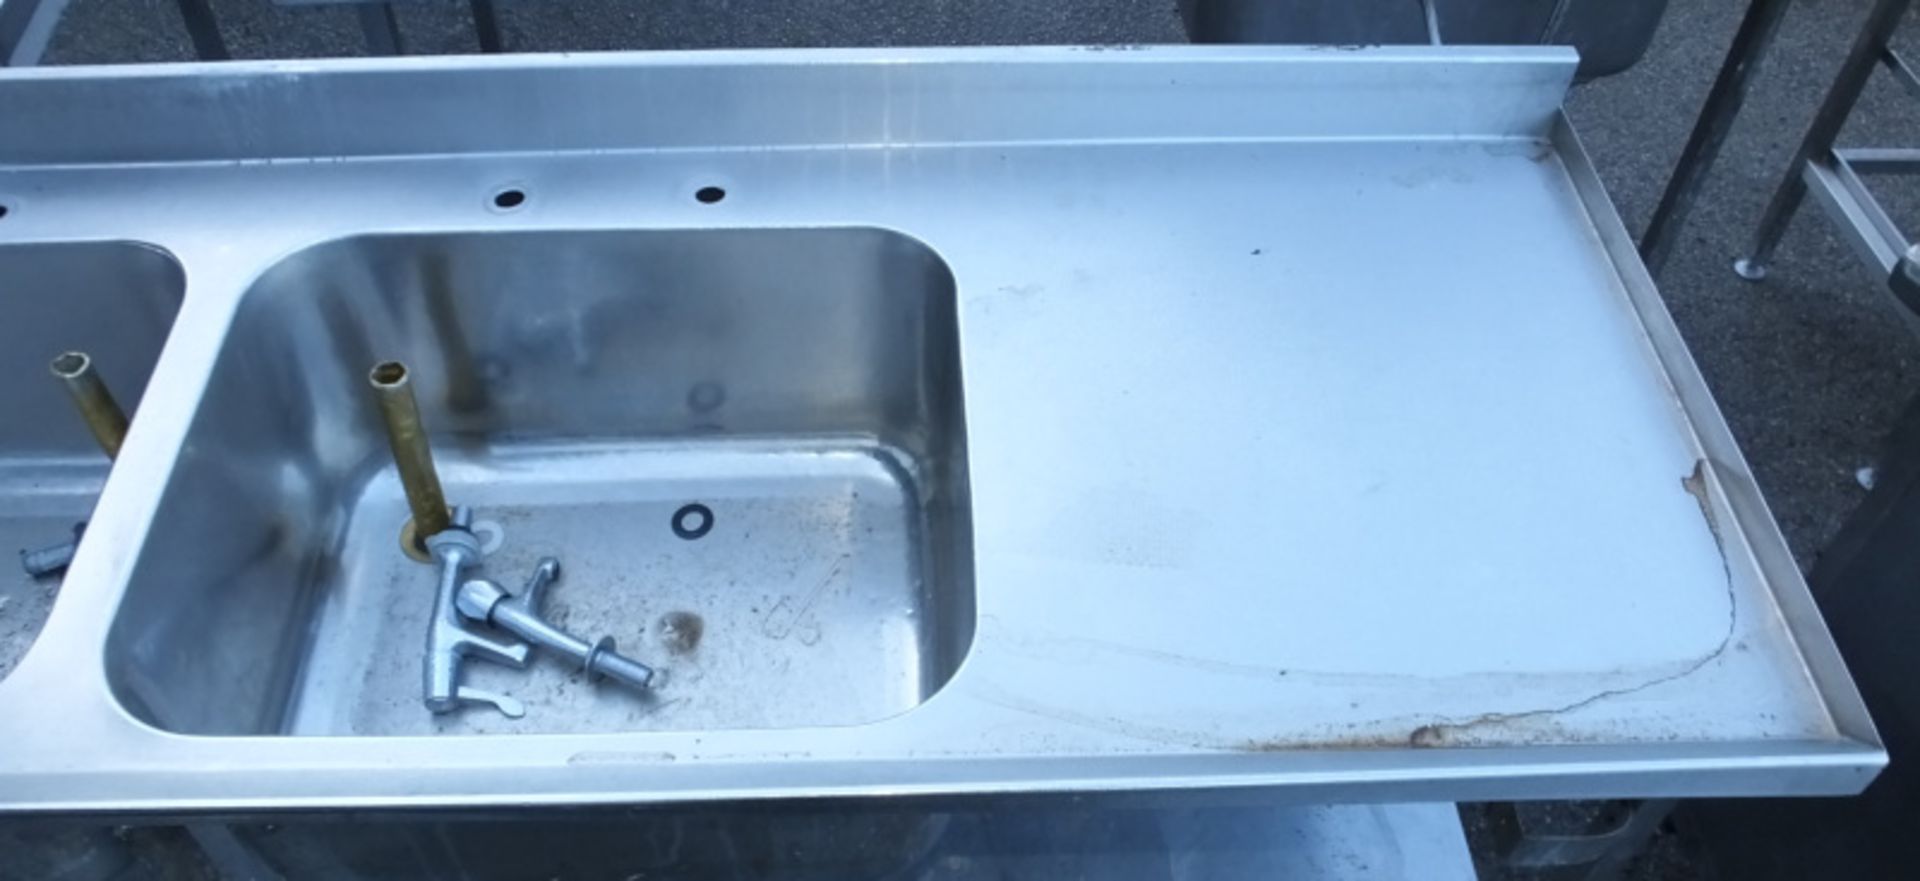 Stainless Steel Double Sink Countertop L 2400mm x W 700mm x H 900mm - Image 3 of 5